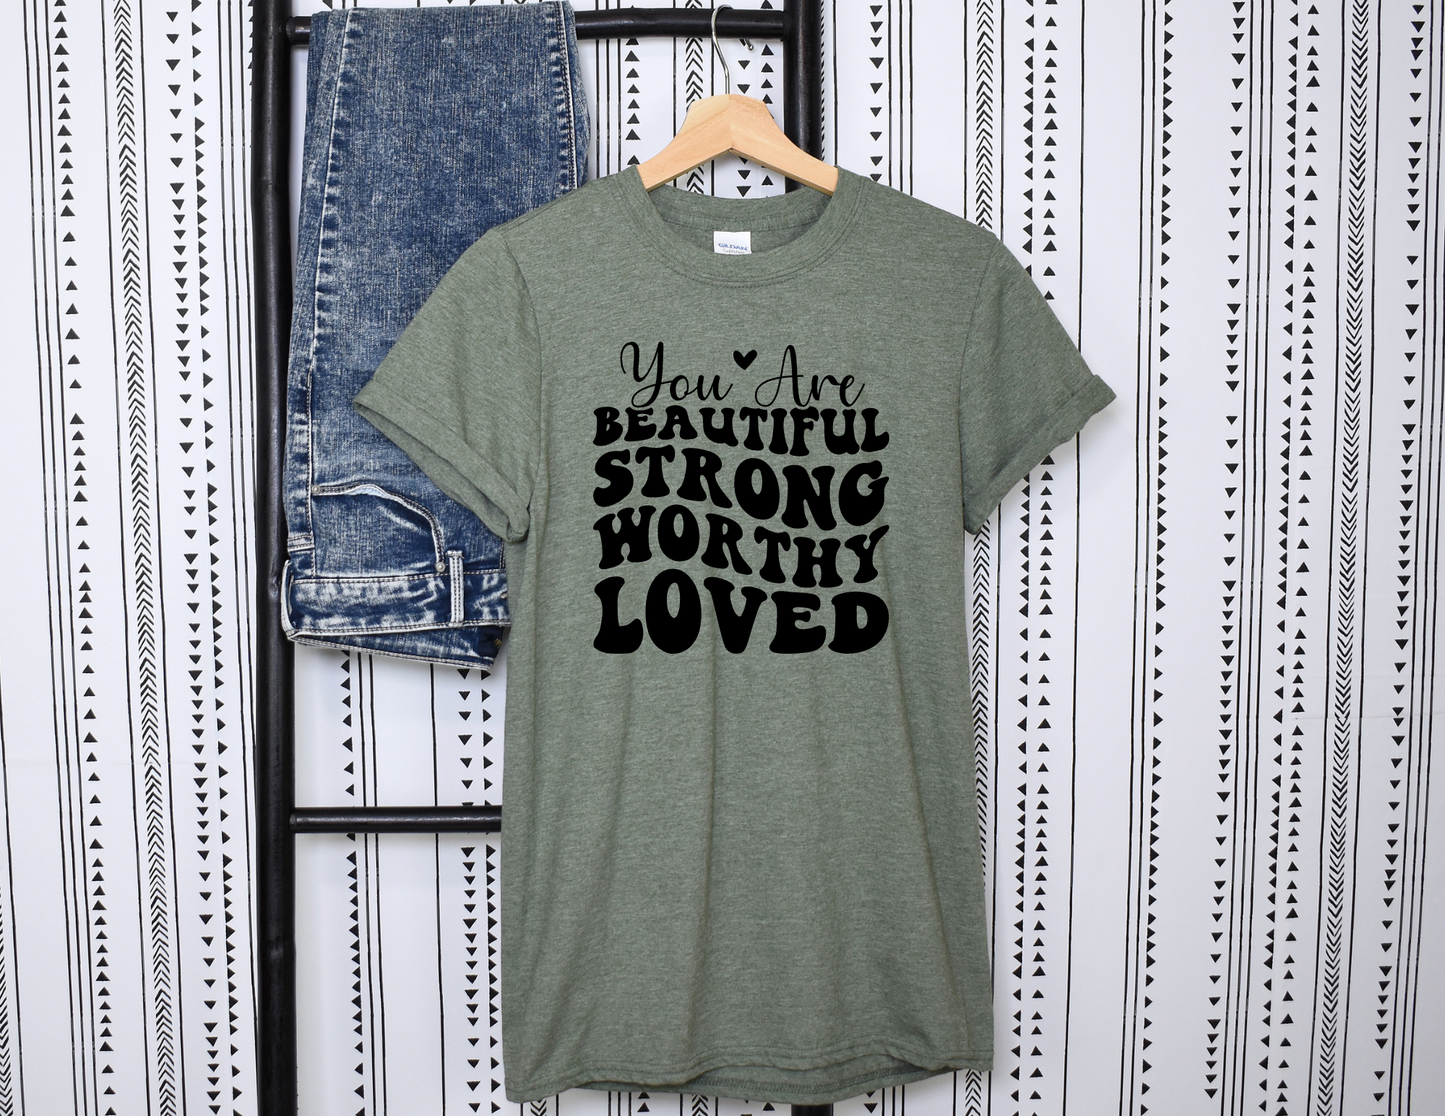 You Are Beautiful, Strong, Worthy & Loved- Short Sleeve Shirt